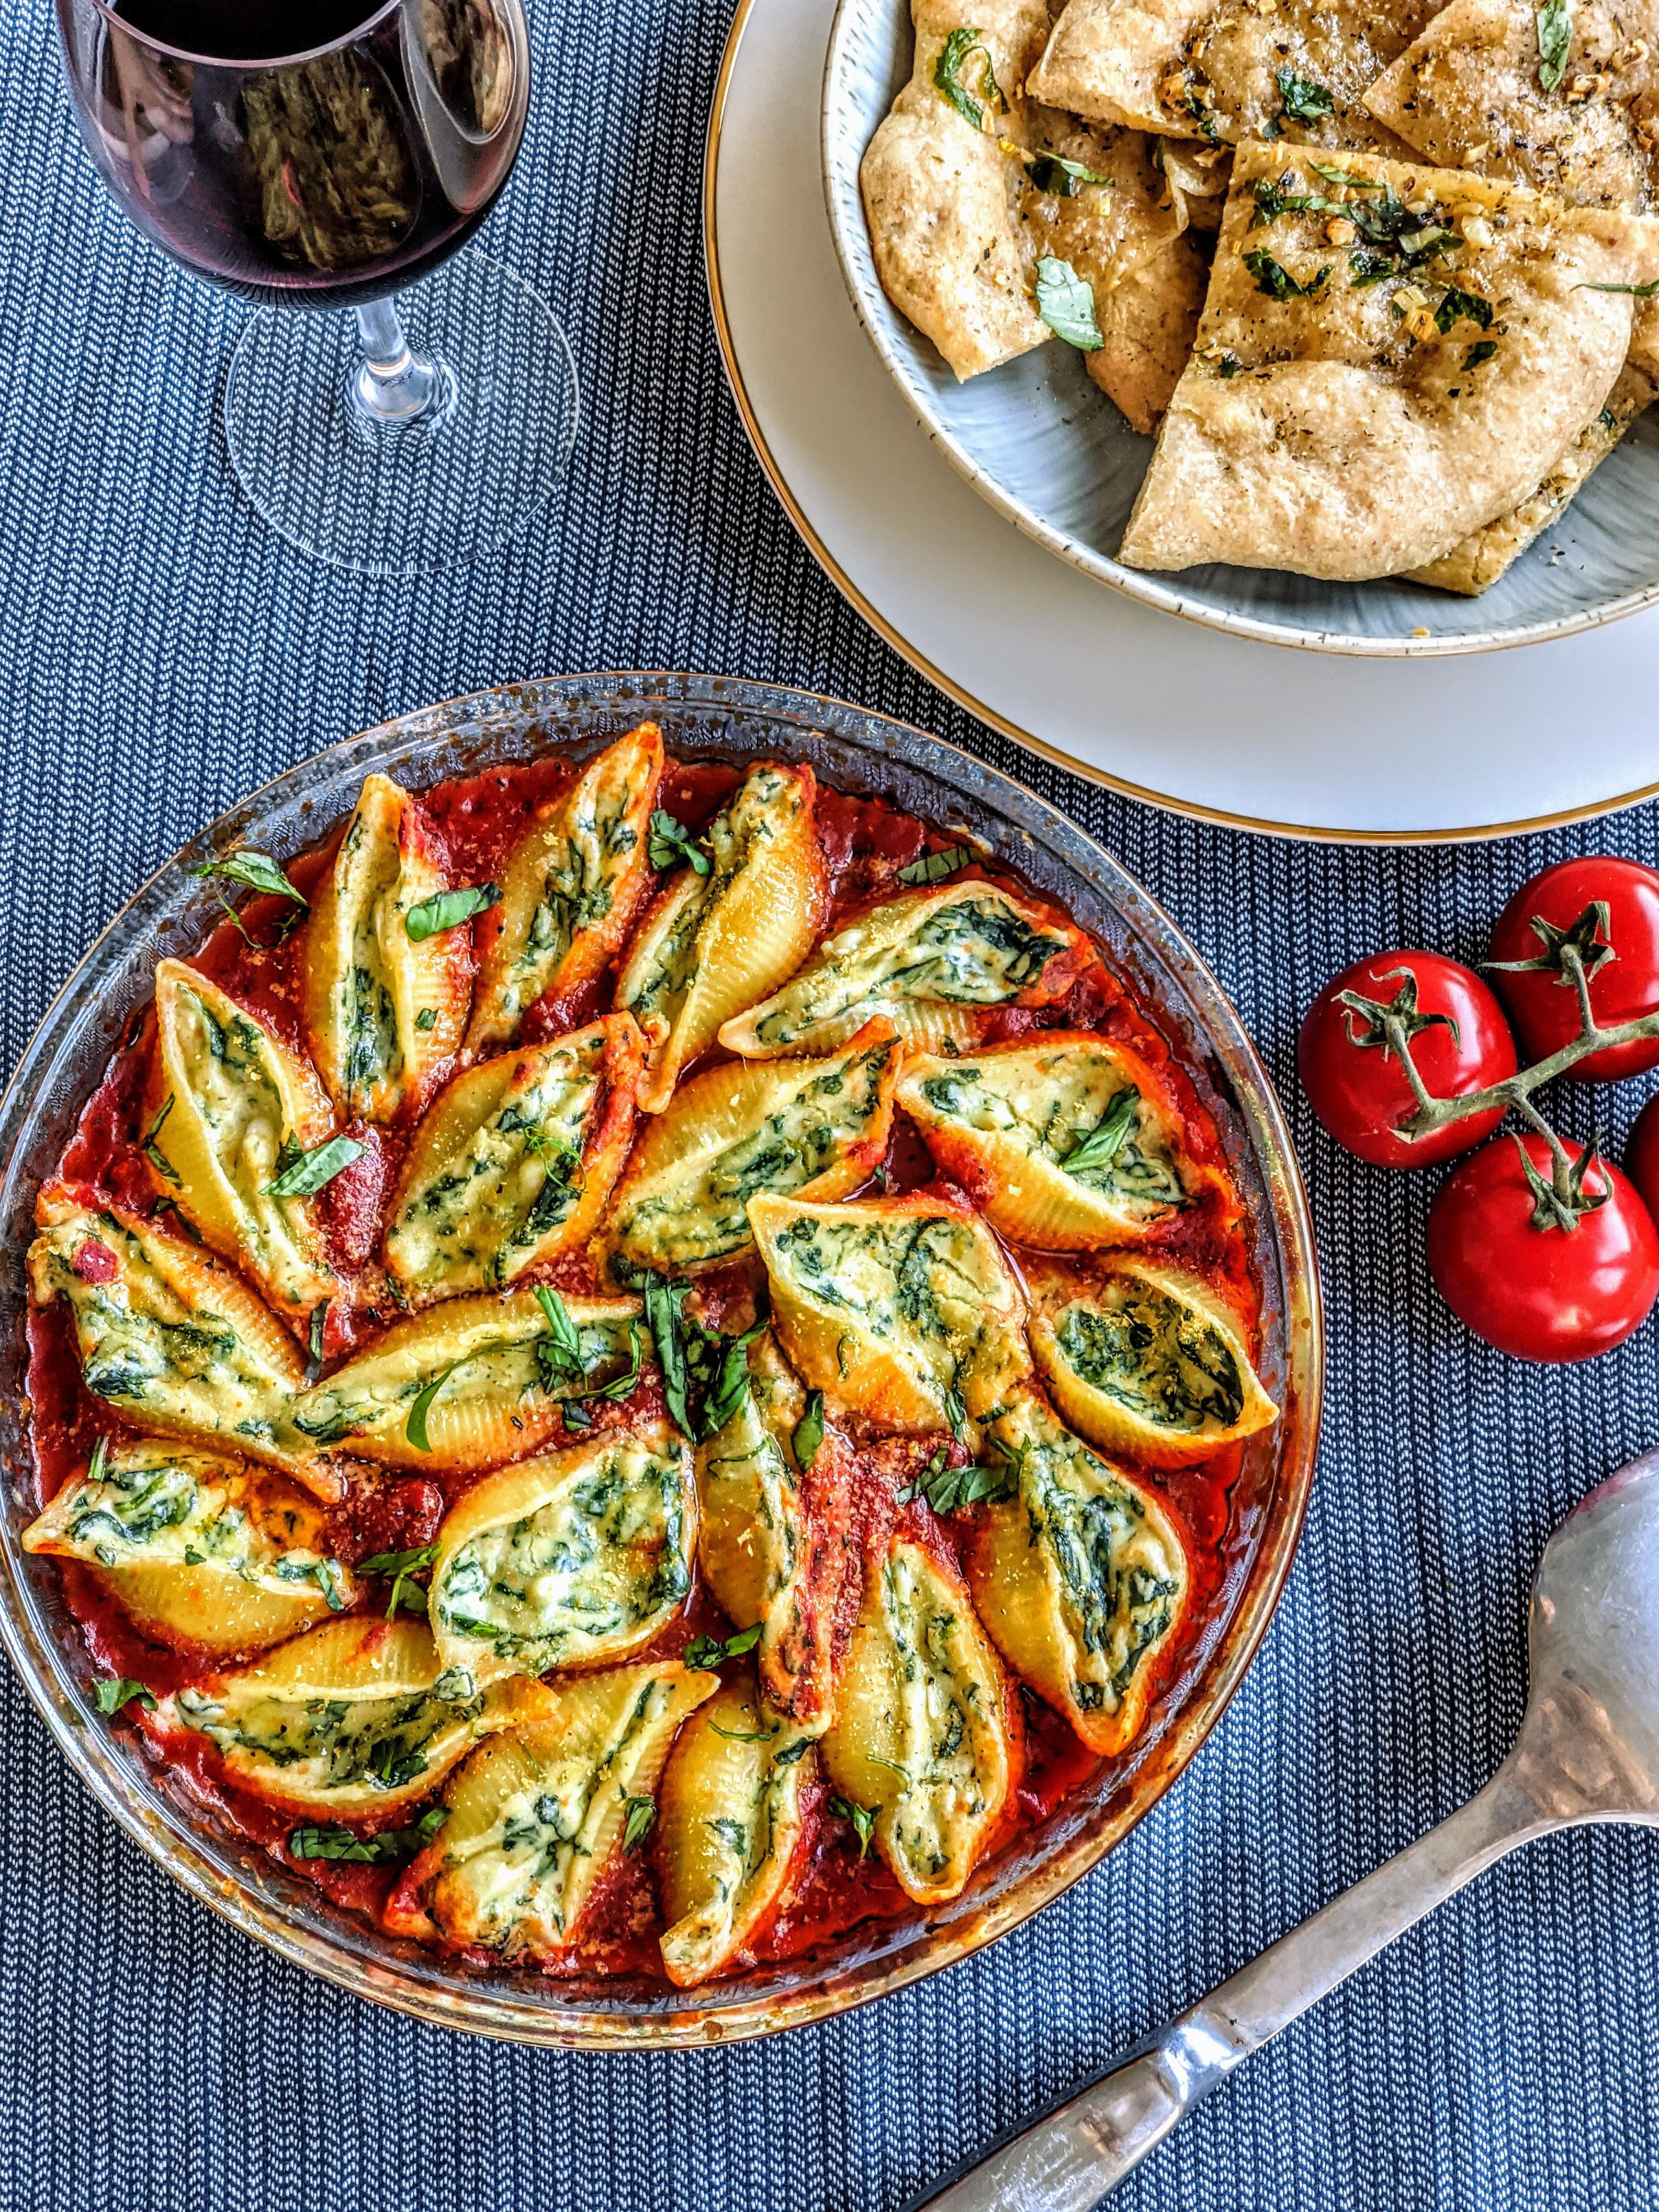 Vegan Baked Spinach & Ricotta Stuffed Conchiglie - Dining and Cooking